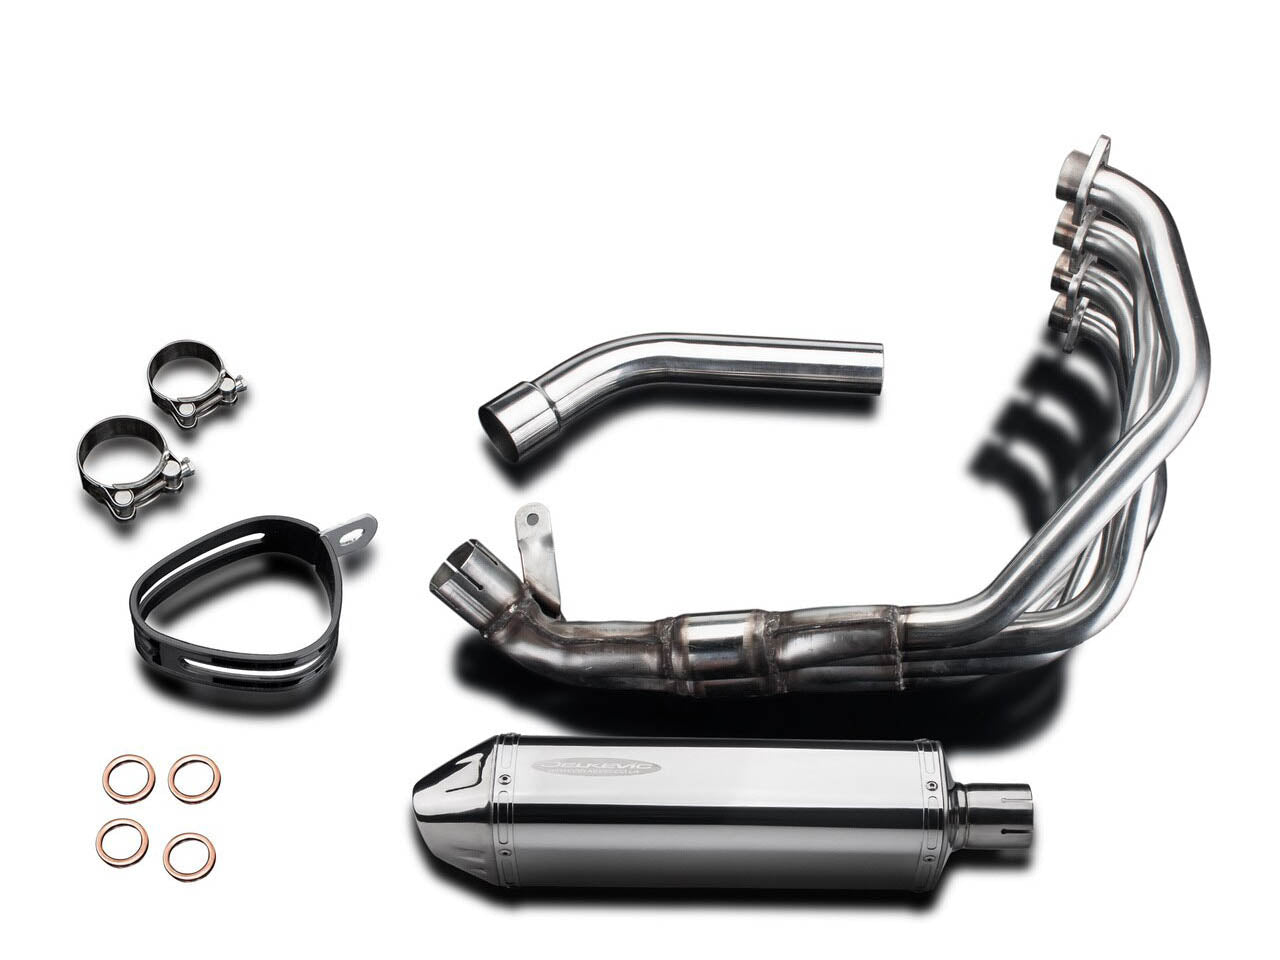 DELKEVIC Honda CB900F / CBR900RR Full Exhaust System 4-1 with 13" Tri-Oval Silencer